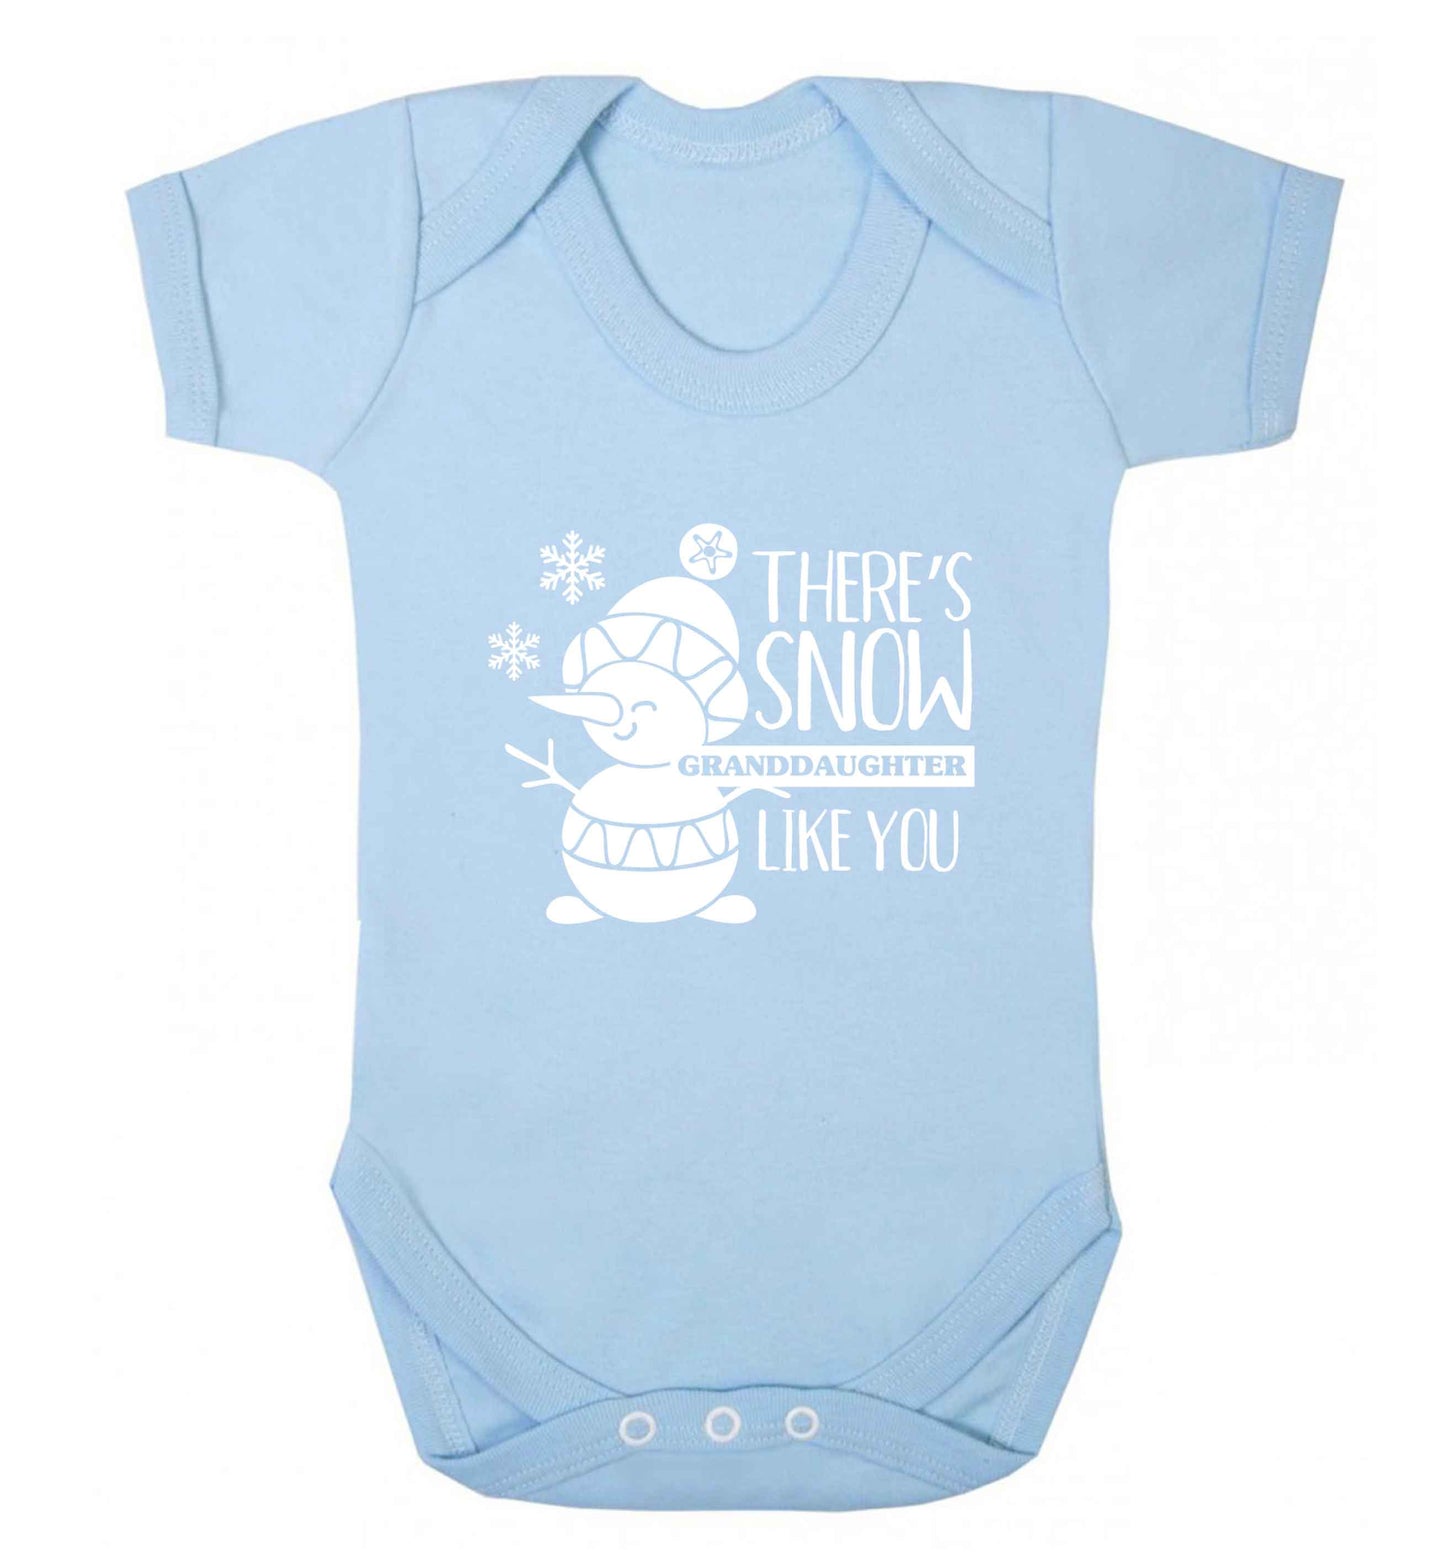 There's snow granddaughter like you baby vest pale blue 18-24 months